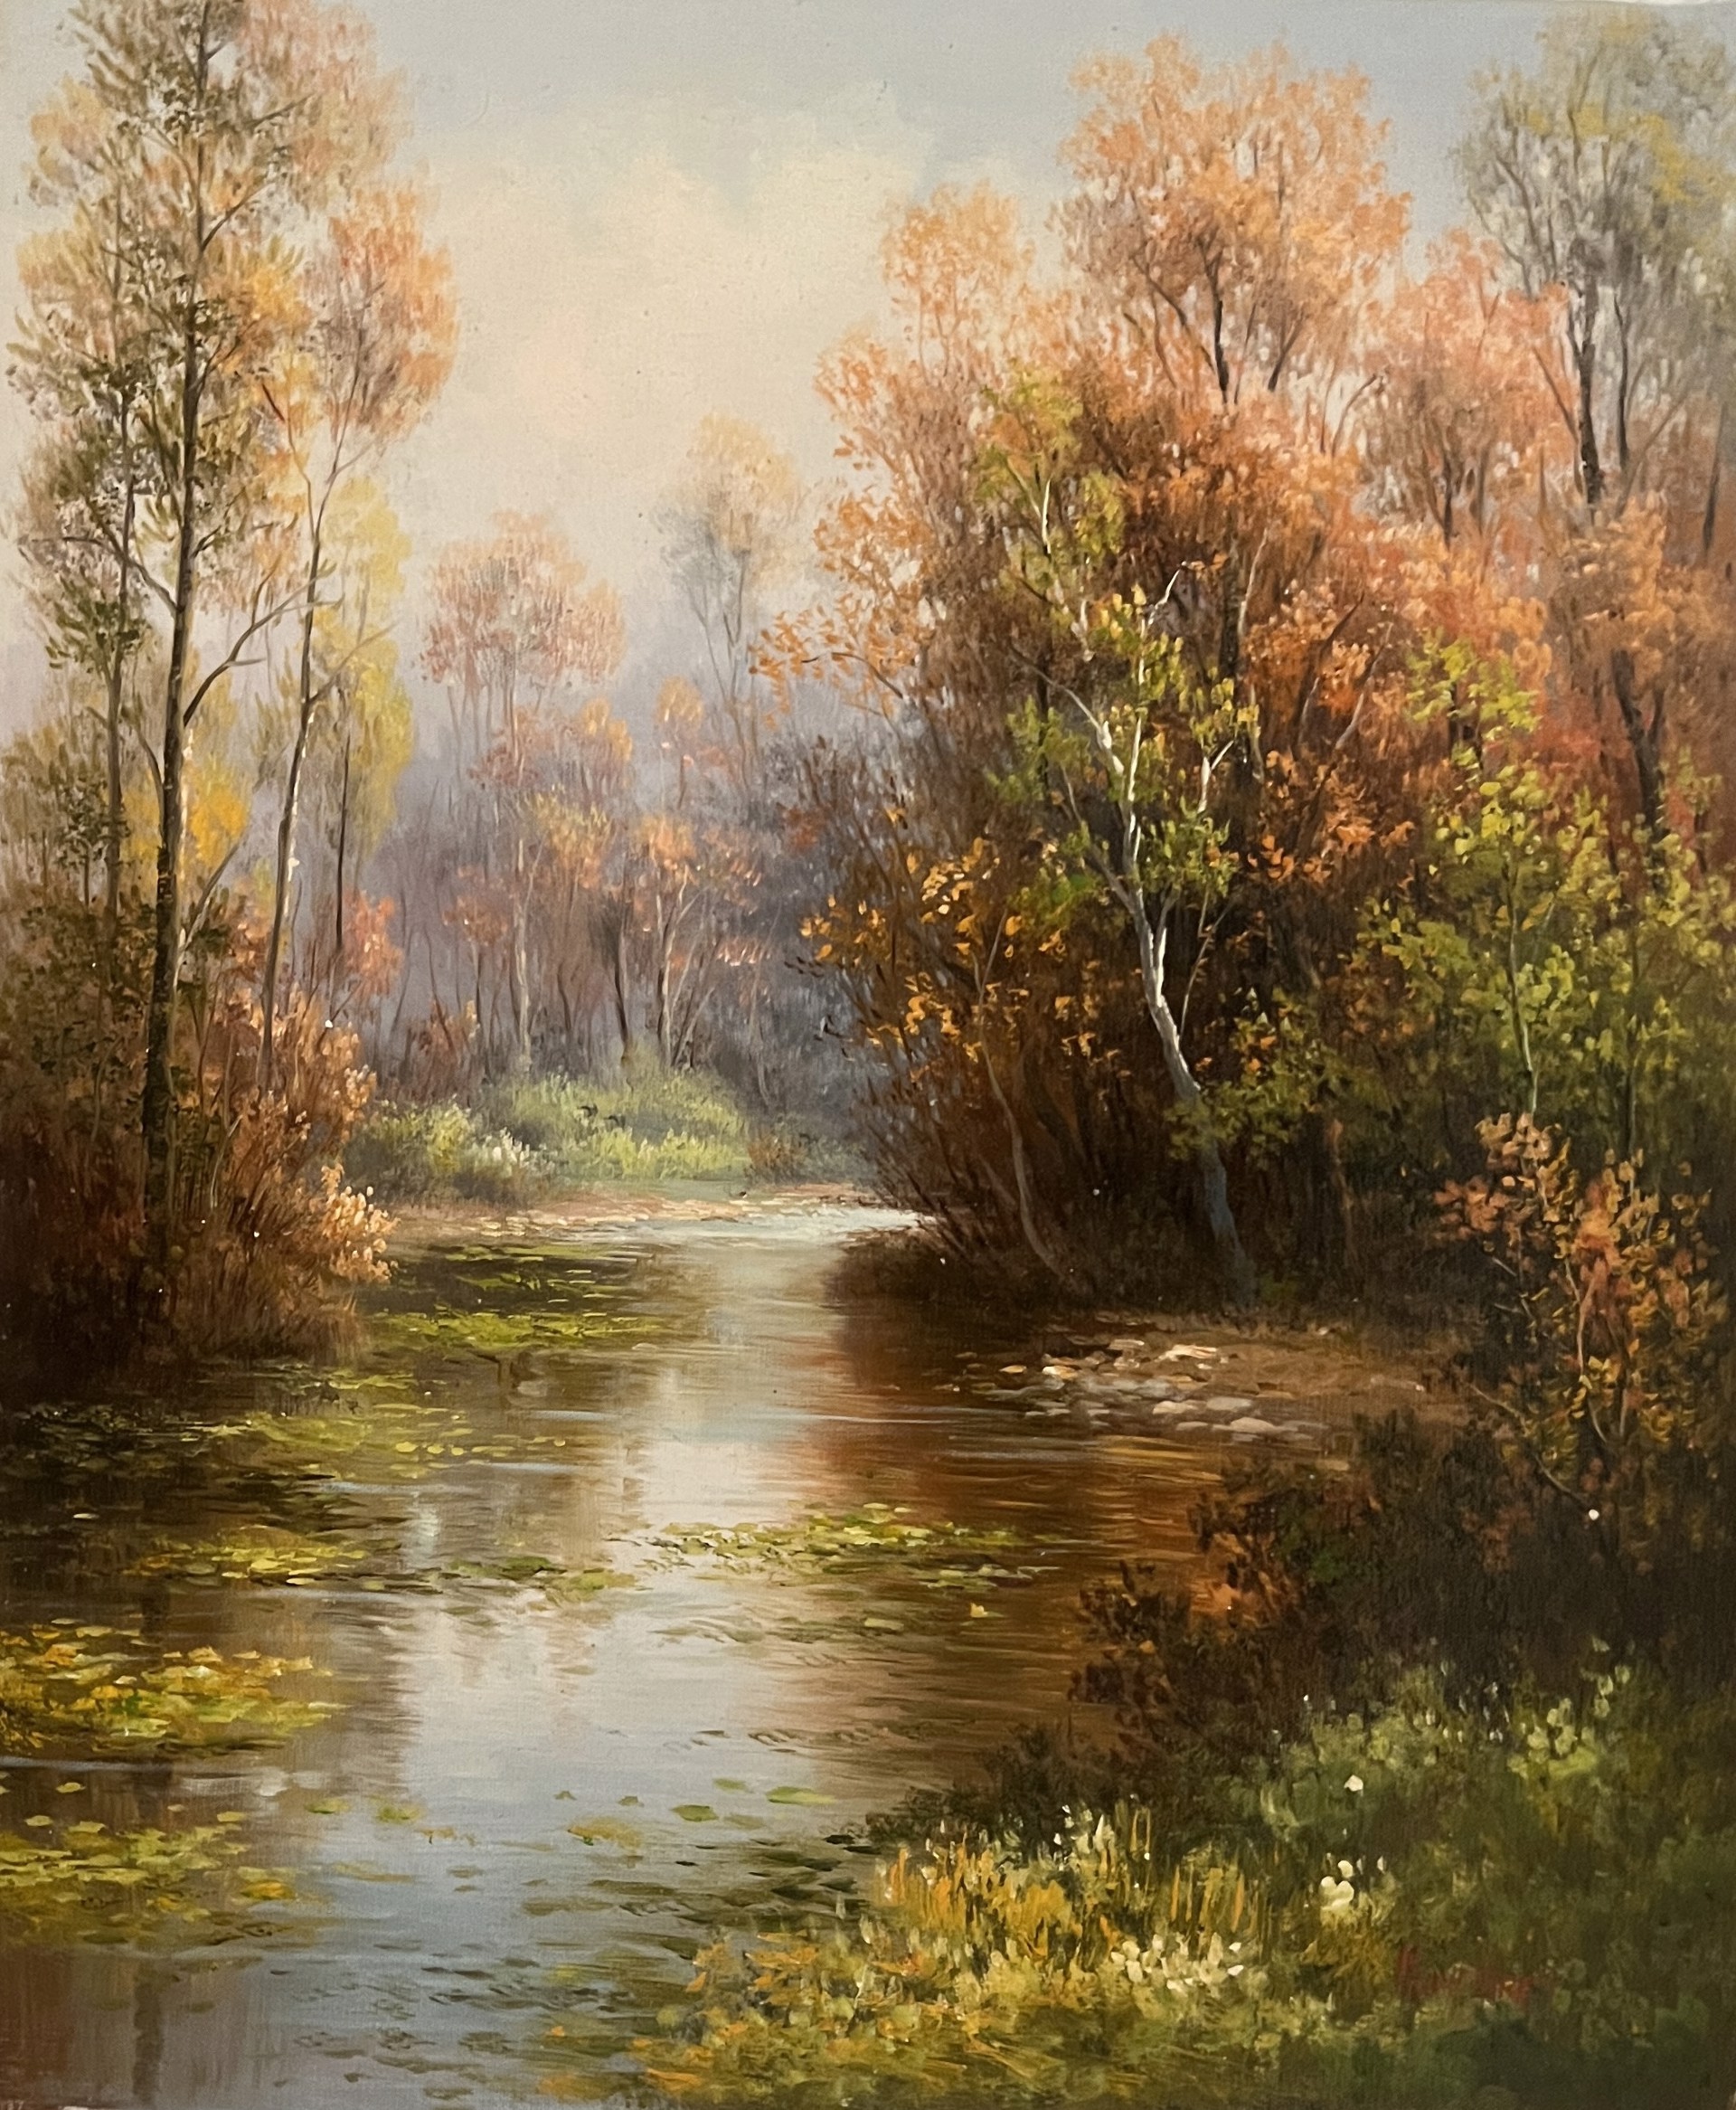 SHALLOW CREEK IN FALL by HUMPHREY